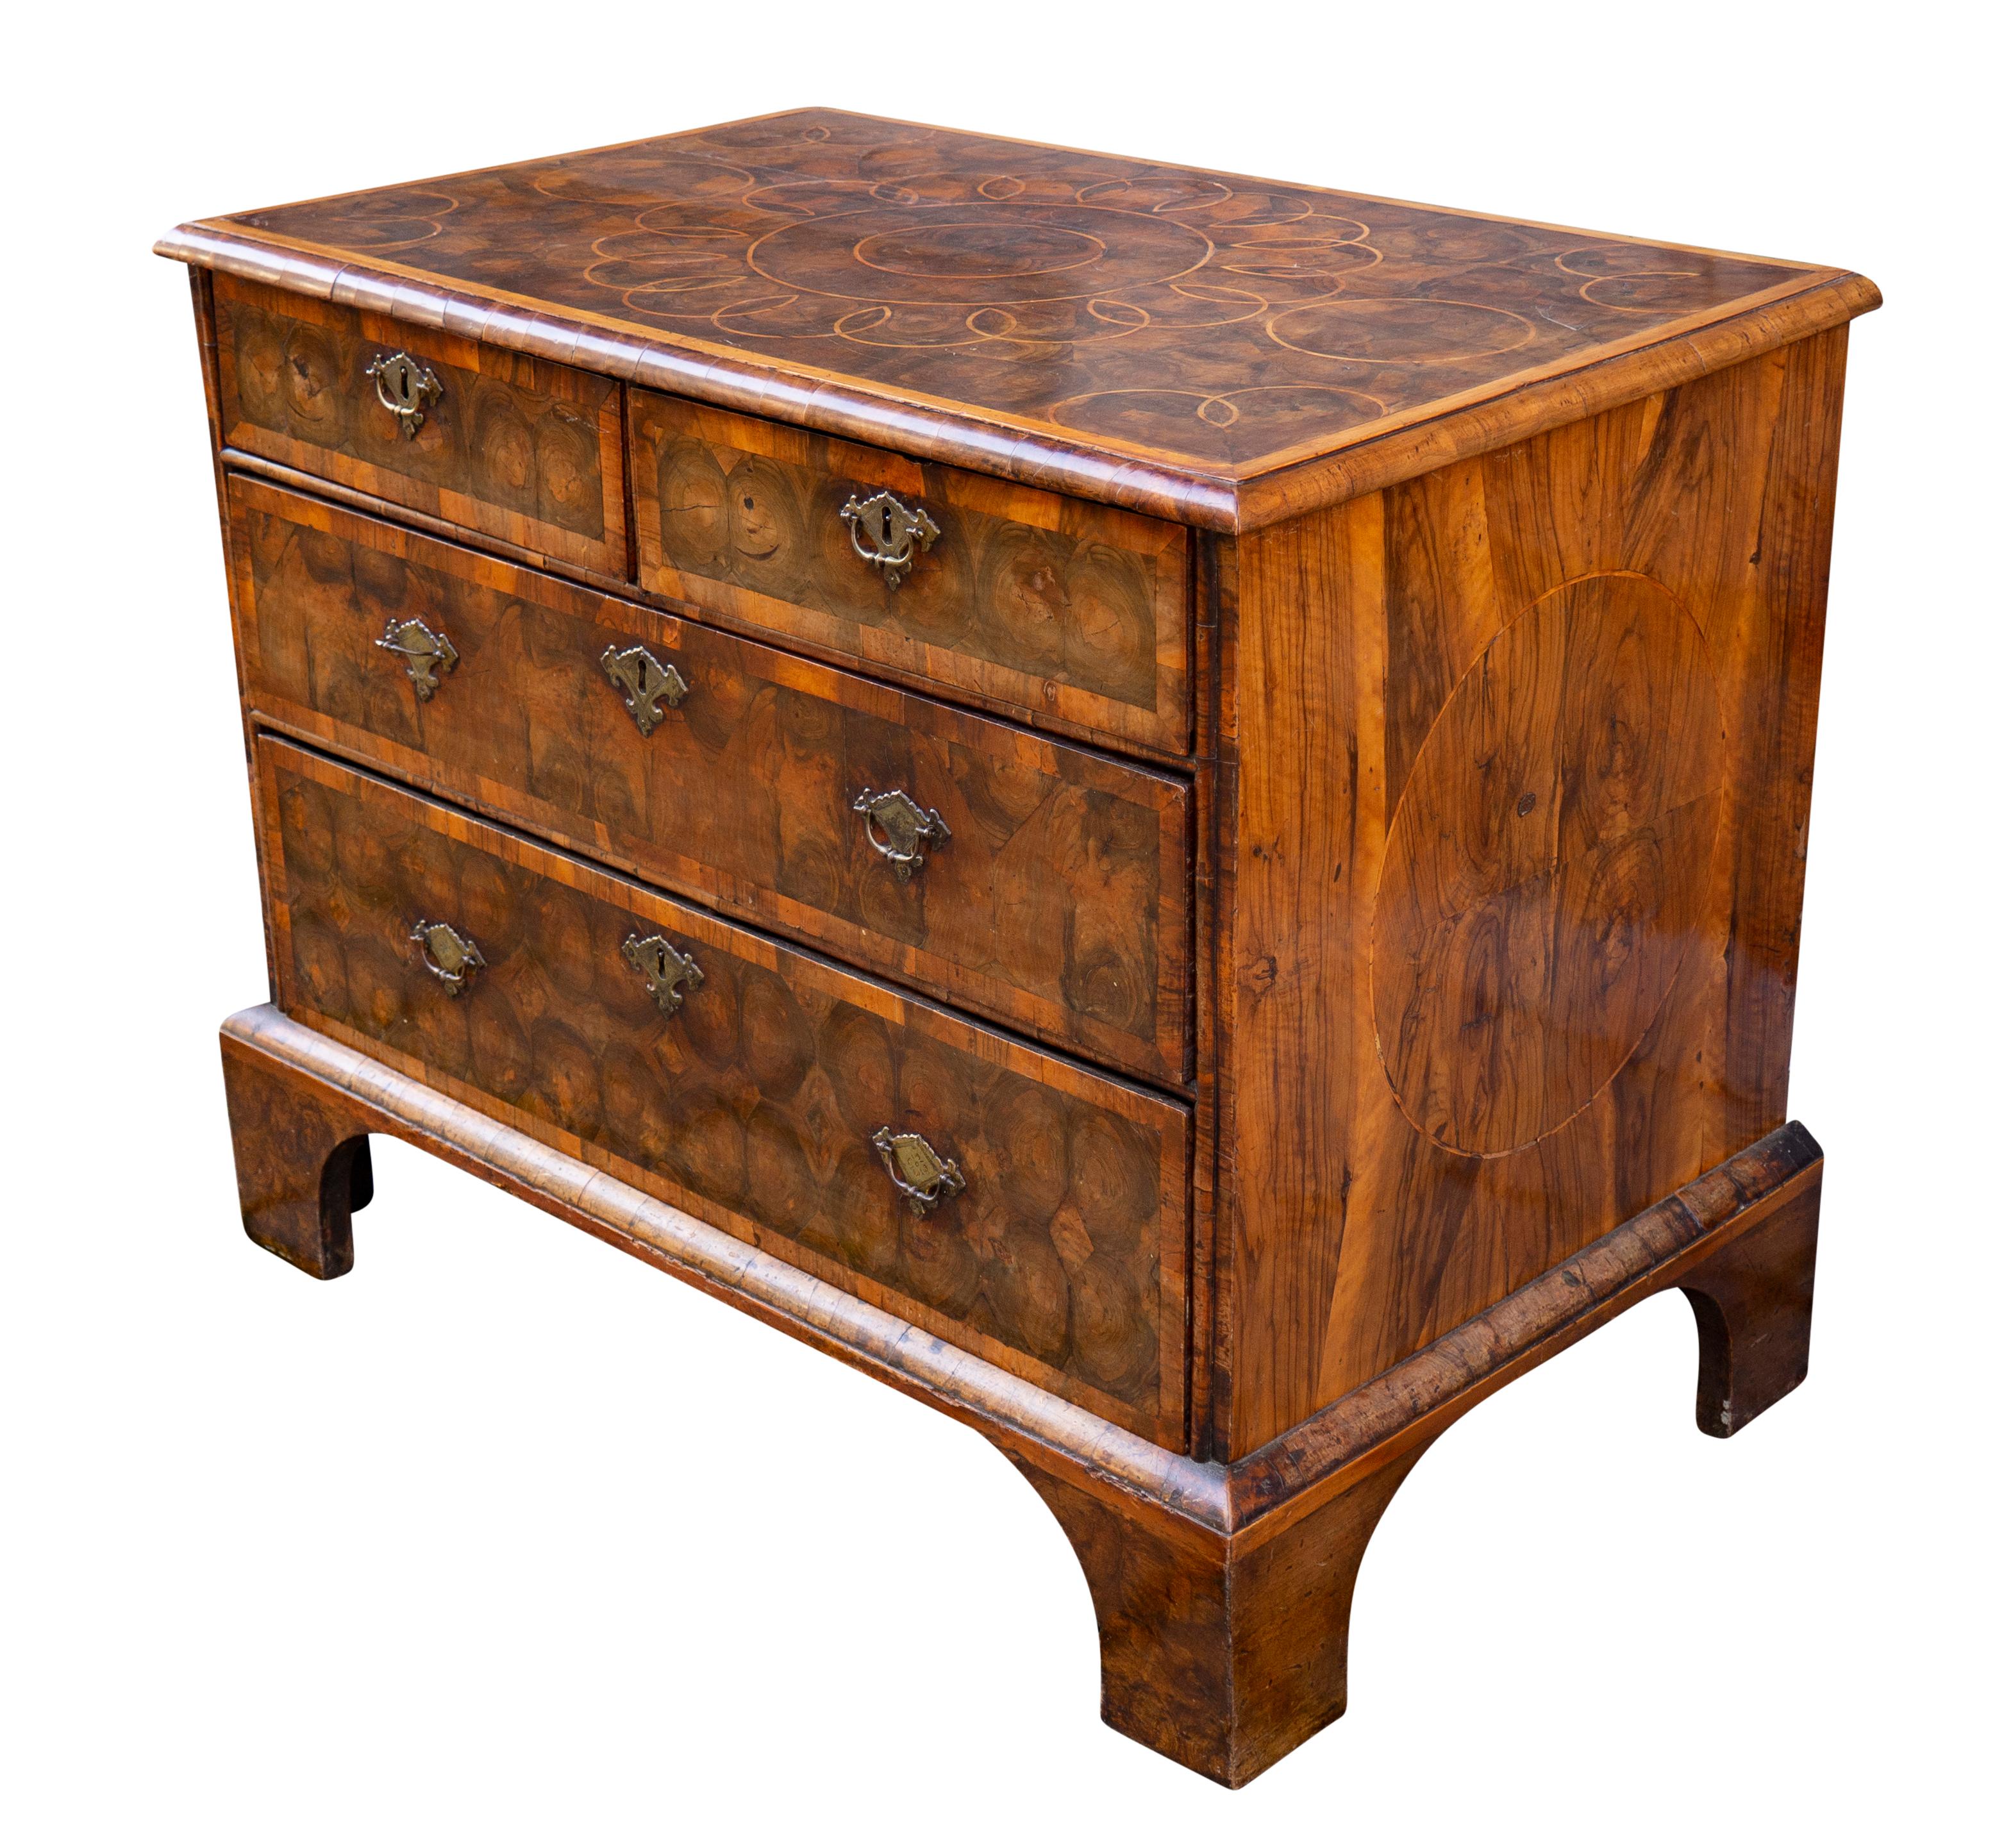 English William and Mary Oyster Veneer Chest of Drawers